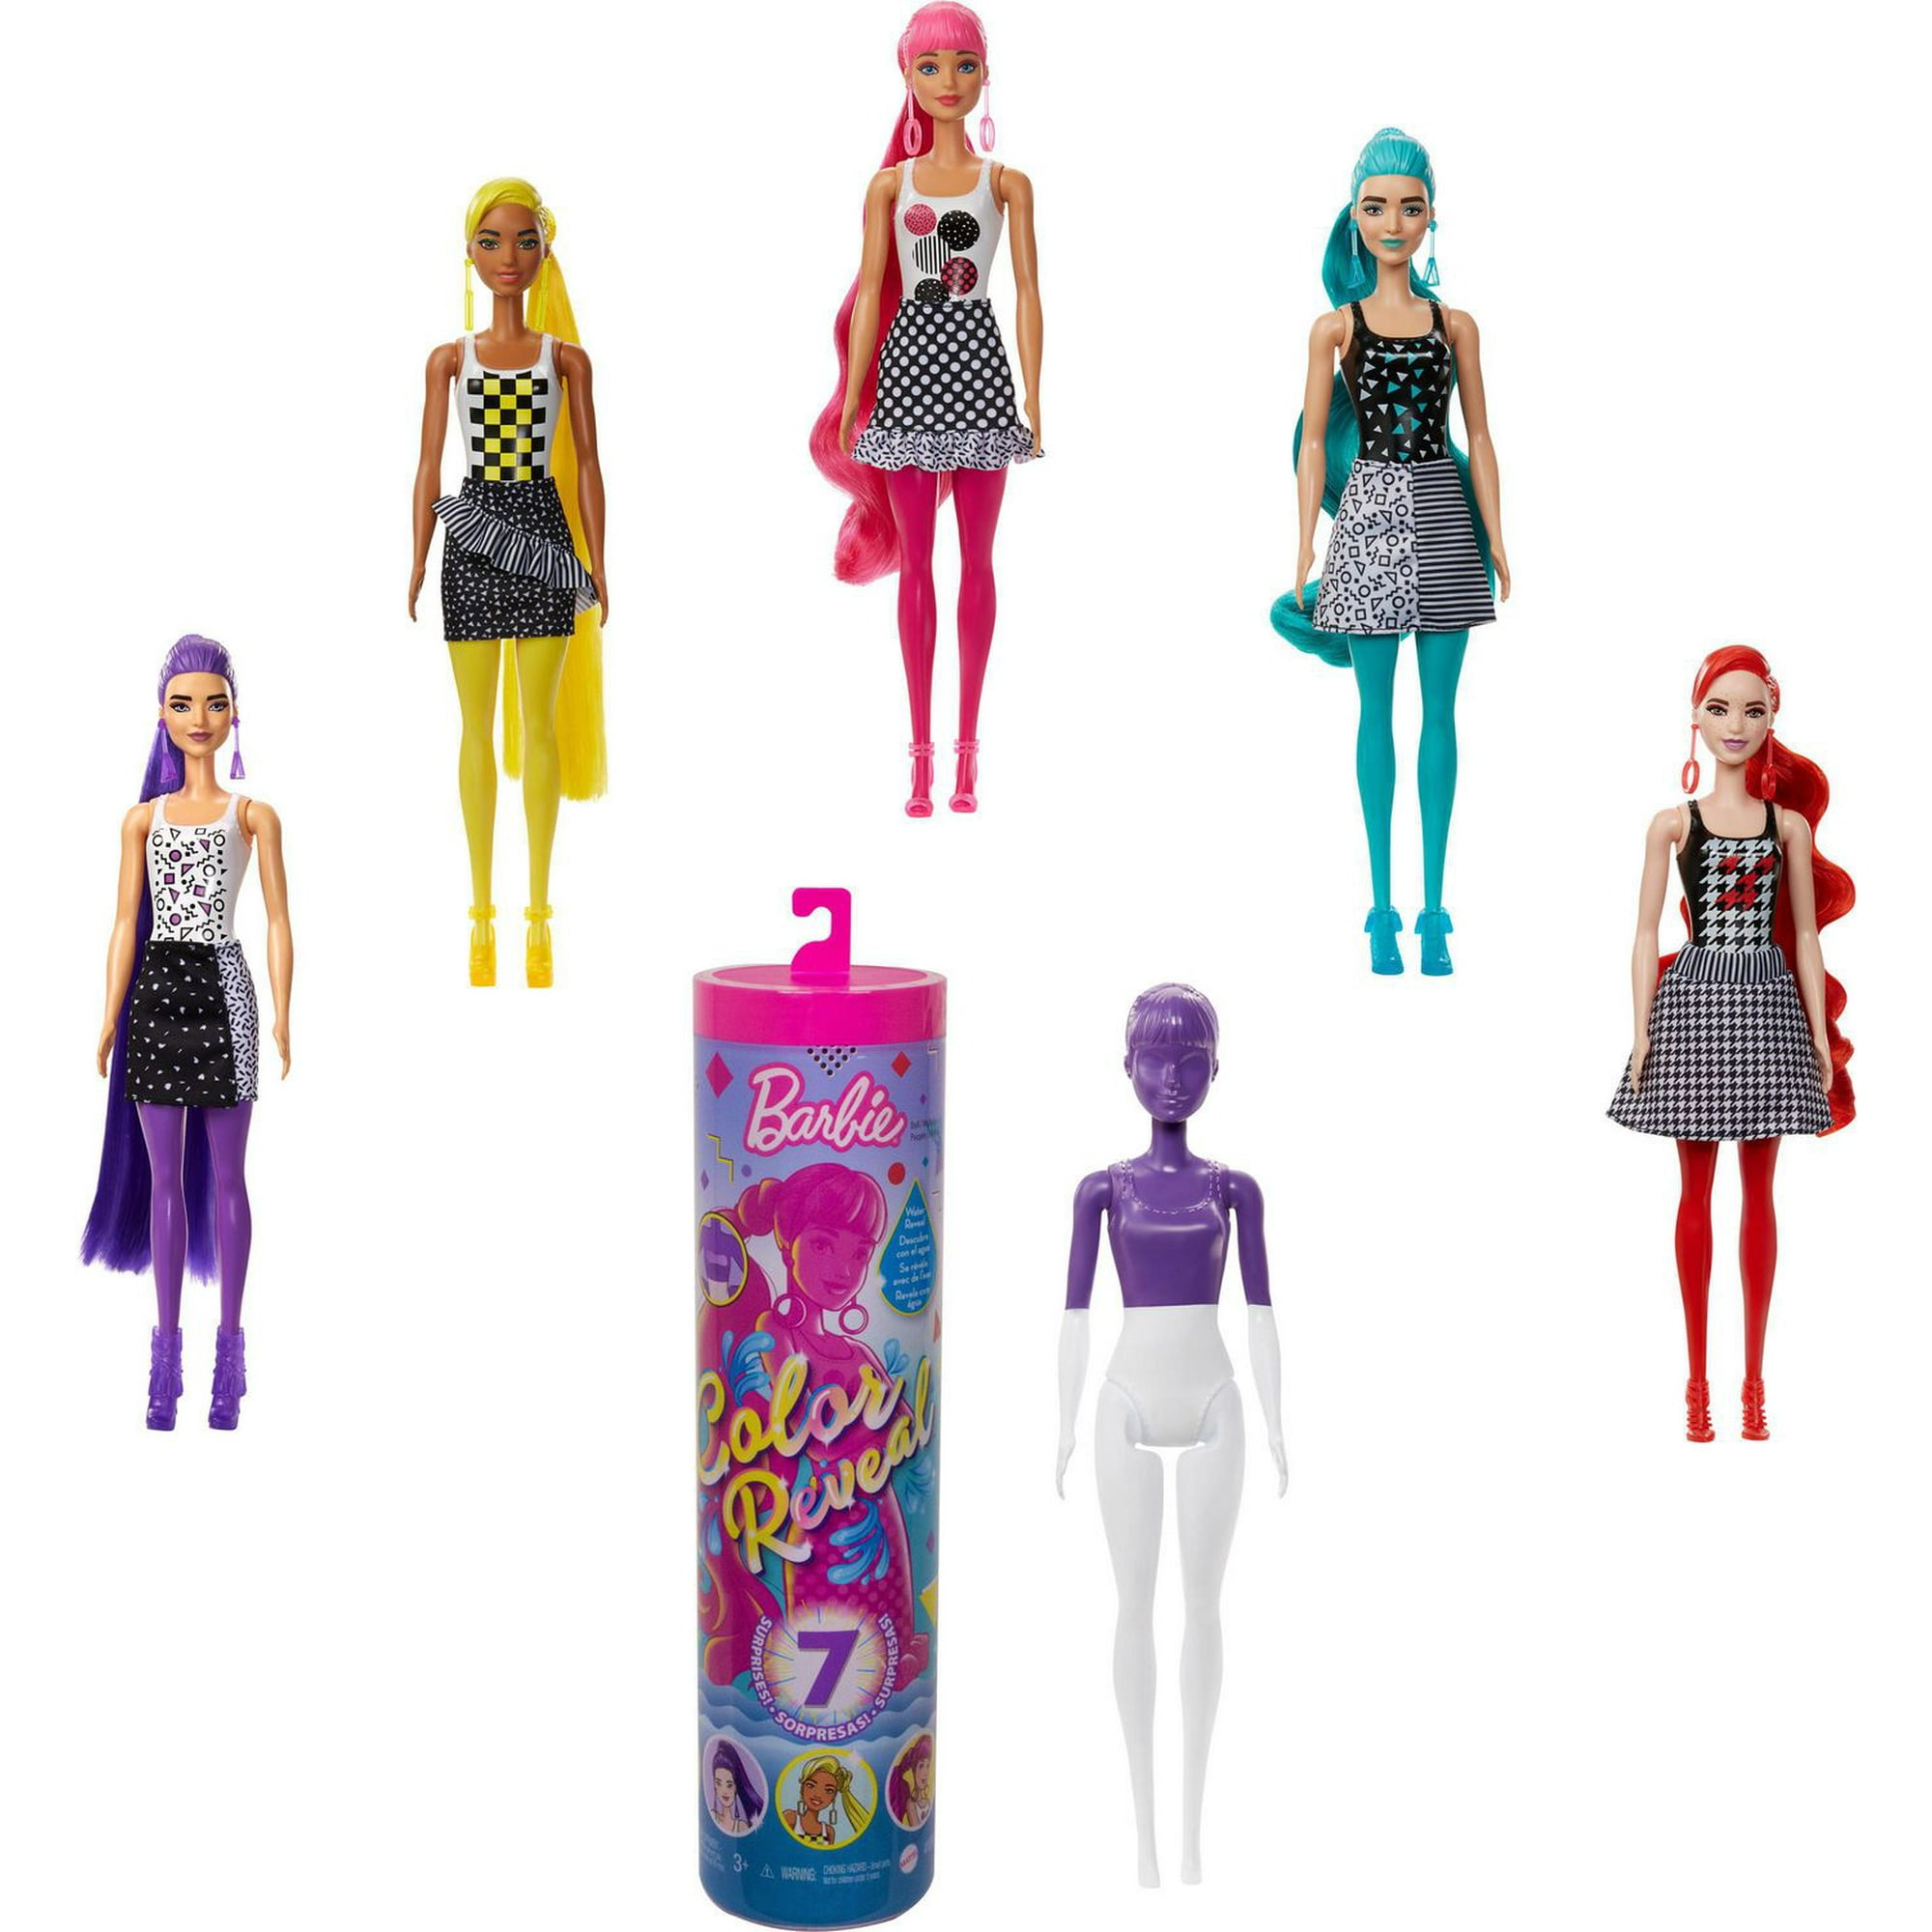 Barbie Made to Move Posable Doll in Purple Color-Blocked Top and